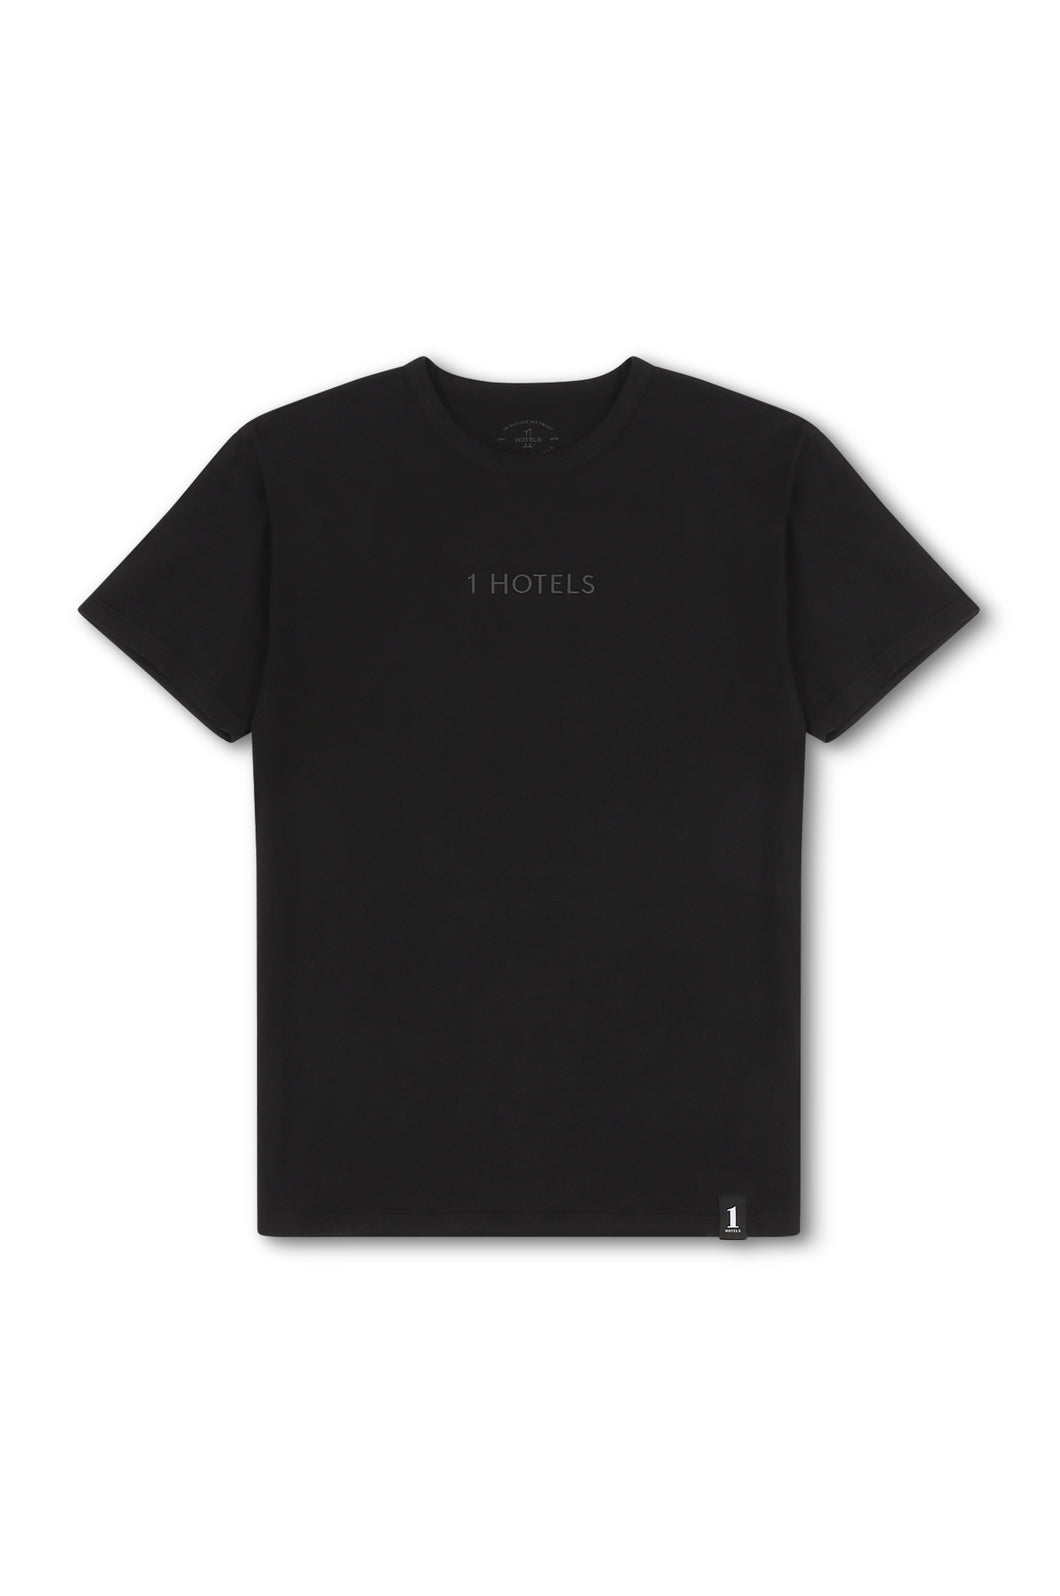 1 Hotels Relaxed Unisex Tee